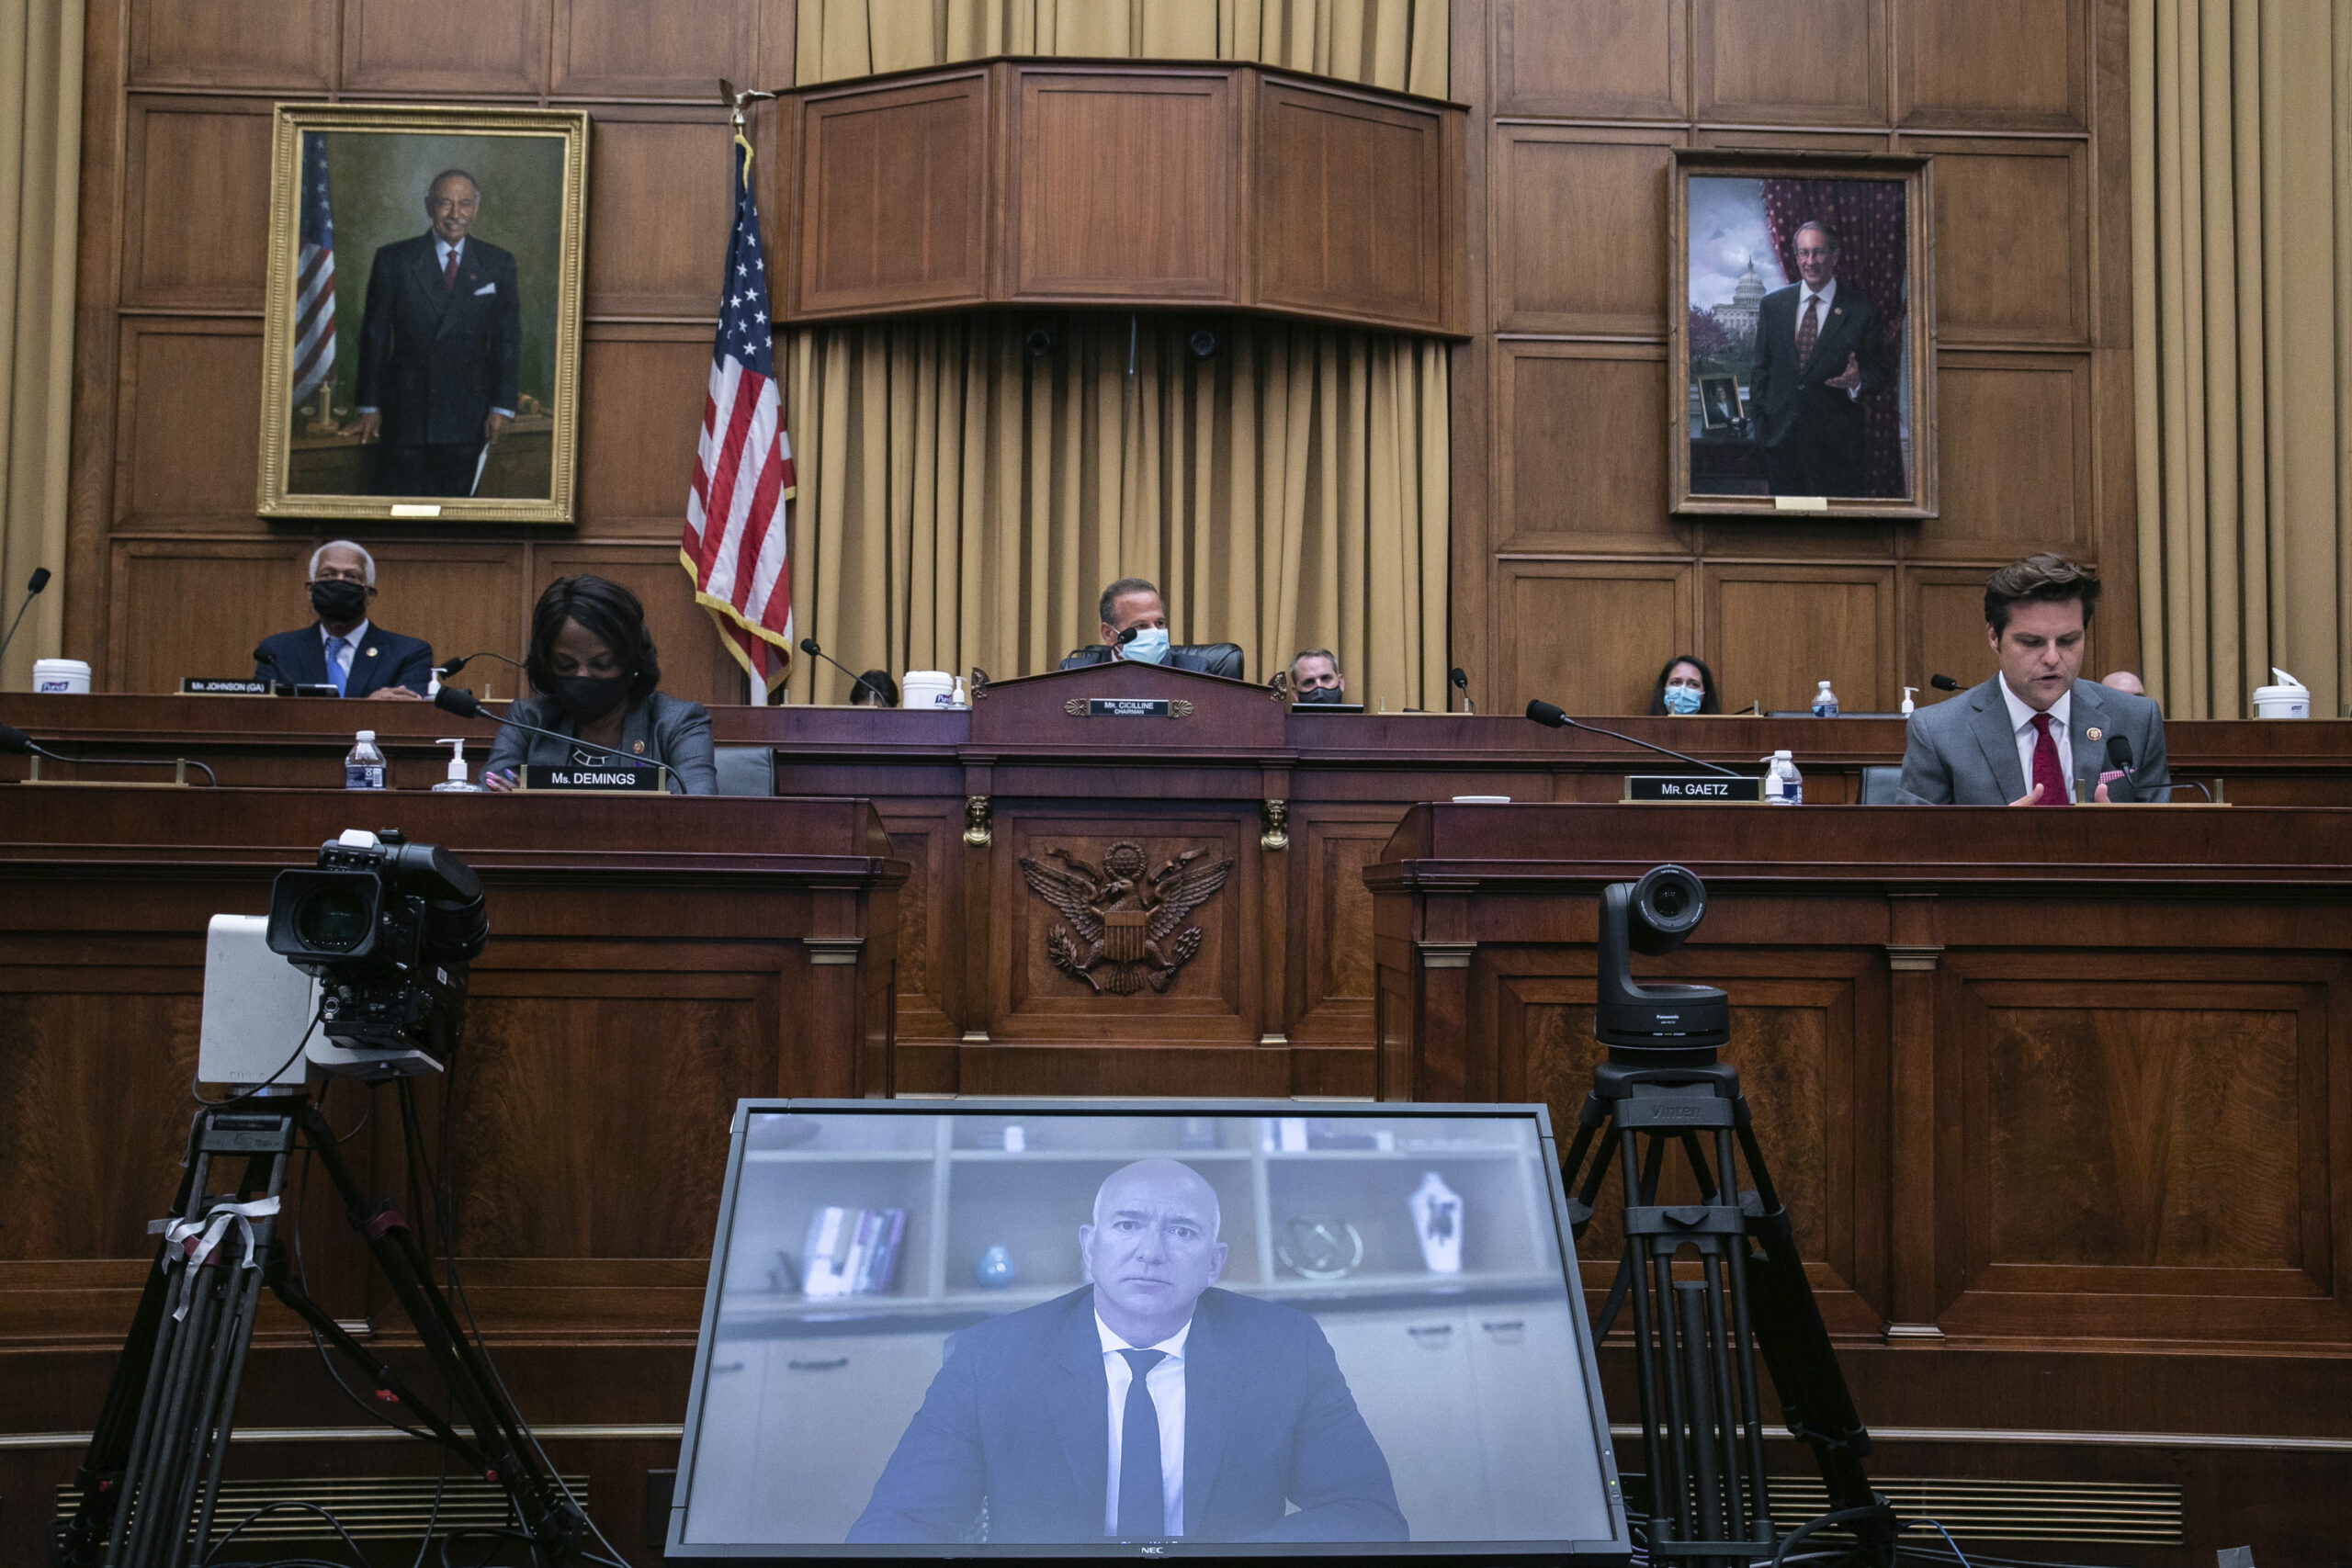 Amazon CEO Jeff Bezos speaks via video conference during a House Judiciary subcommittee hearing on antitrust on Capitol Hill on Wednesday, July 29, 2020, in Washington.